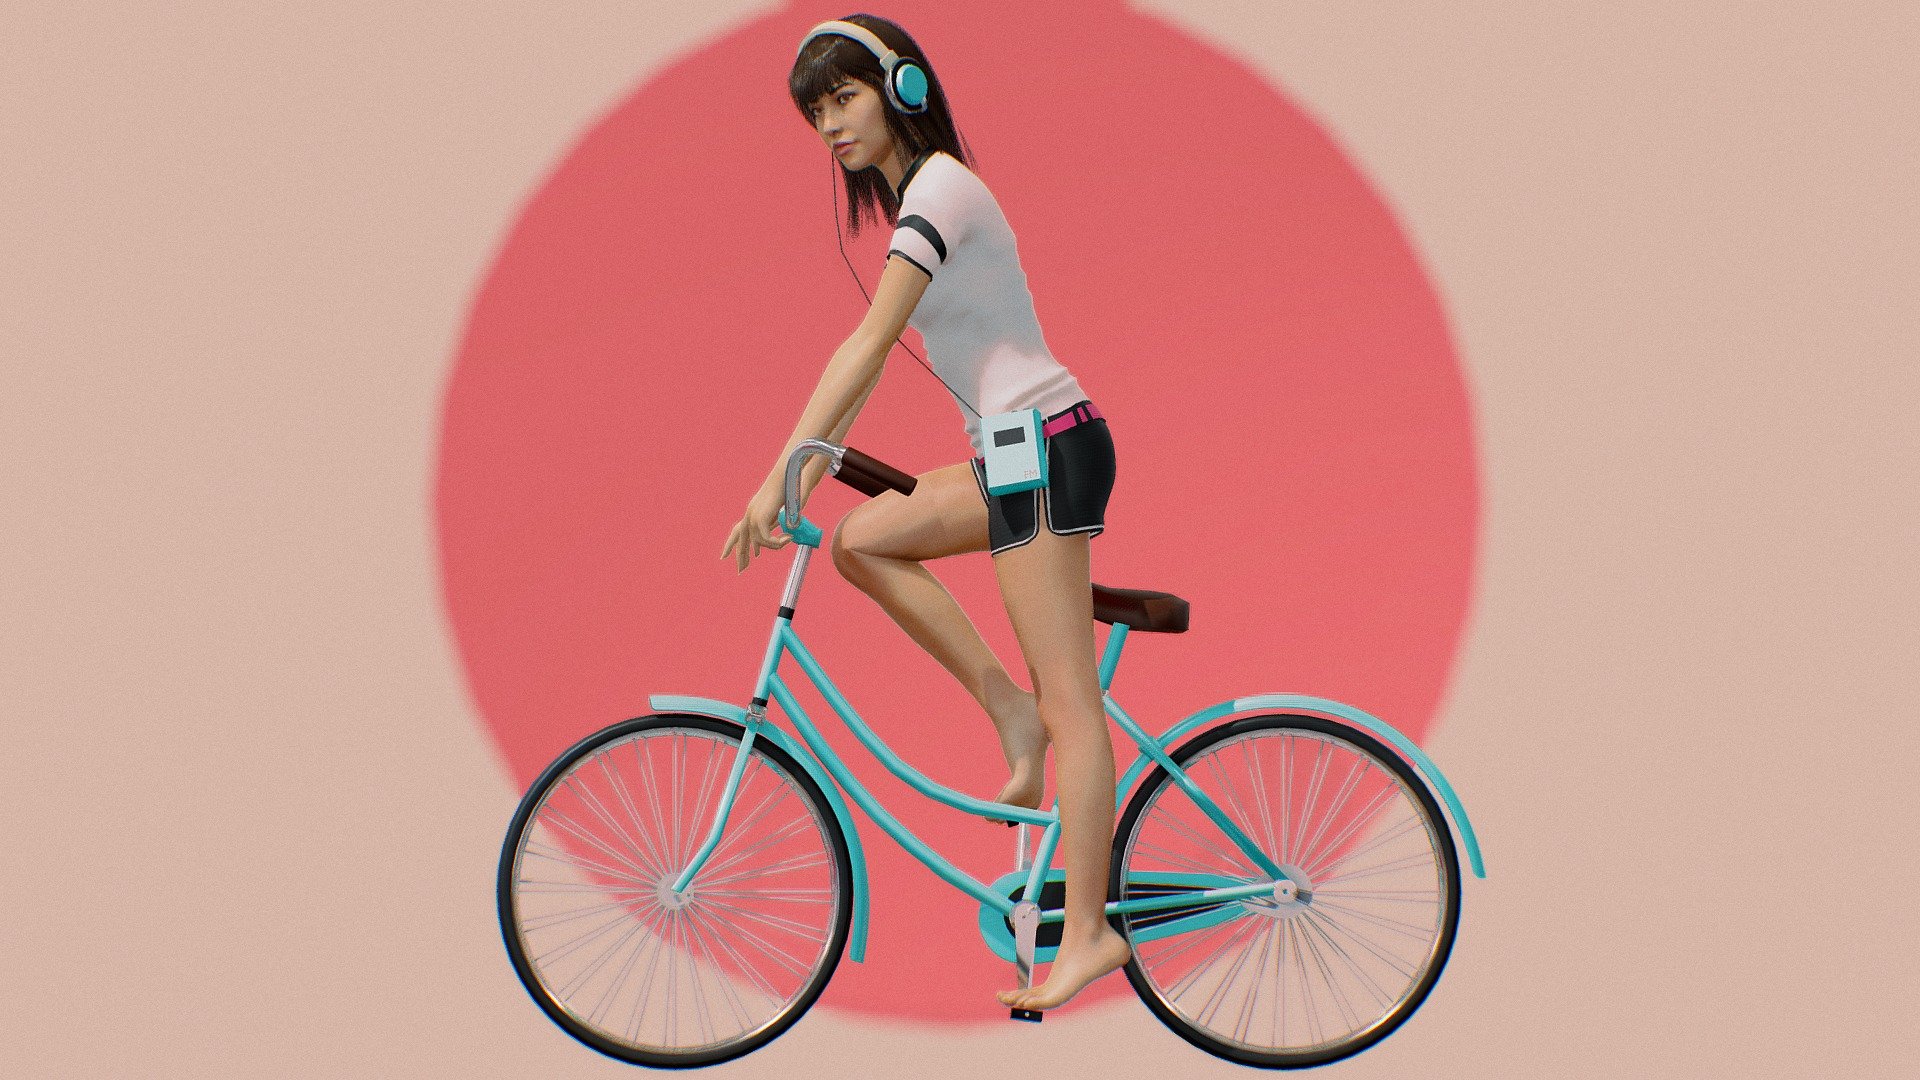 Music by Daniel Dorado.
Original Design by Mónica Carrero.

Suggestions for 600 followers free 3d model?
Bike Girl FanArt.
Suggested by @toledocodezero24
No animation.
Note: Applied armature, No rest T-poste this time 3d model